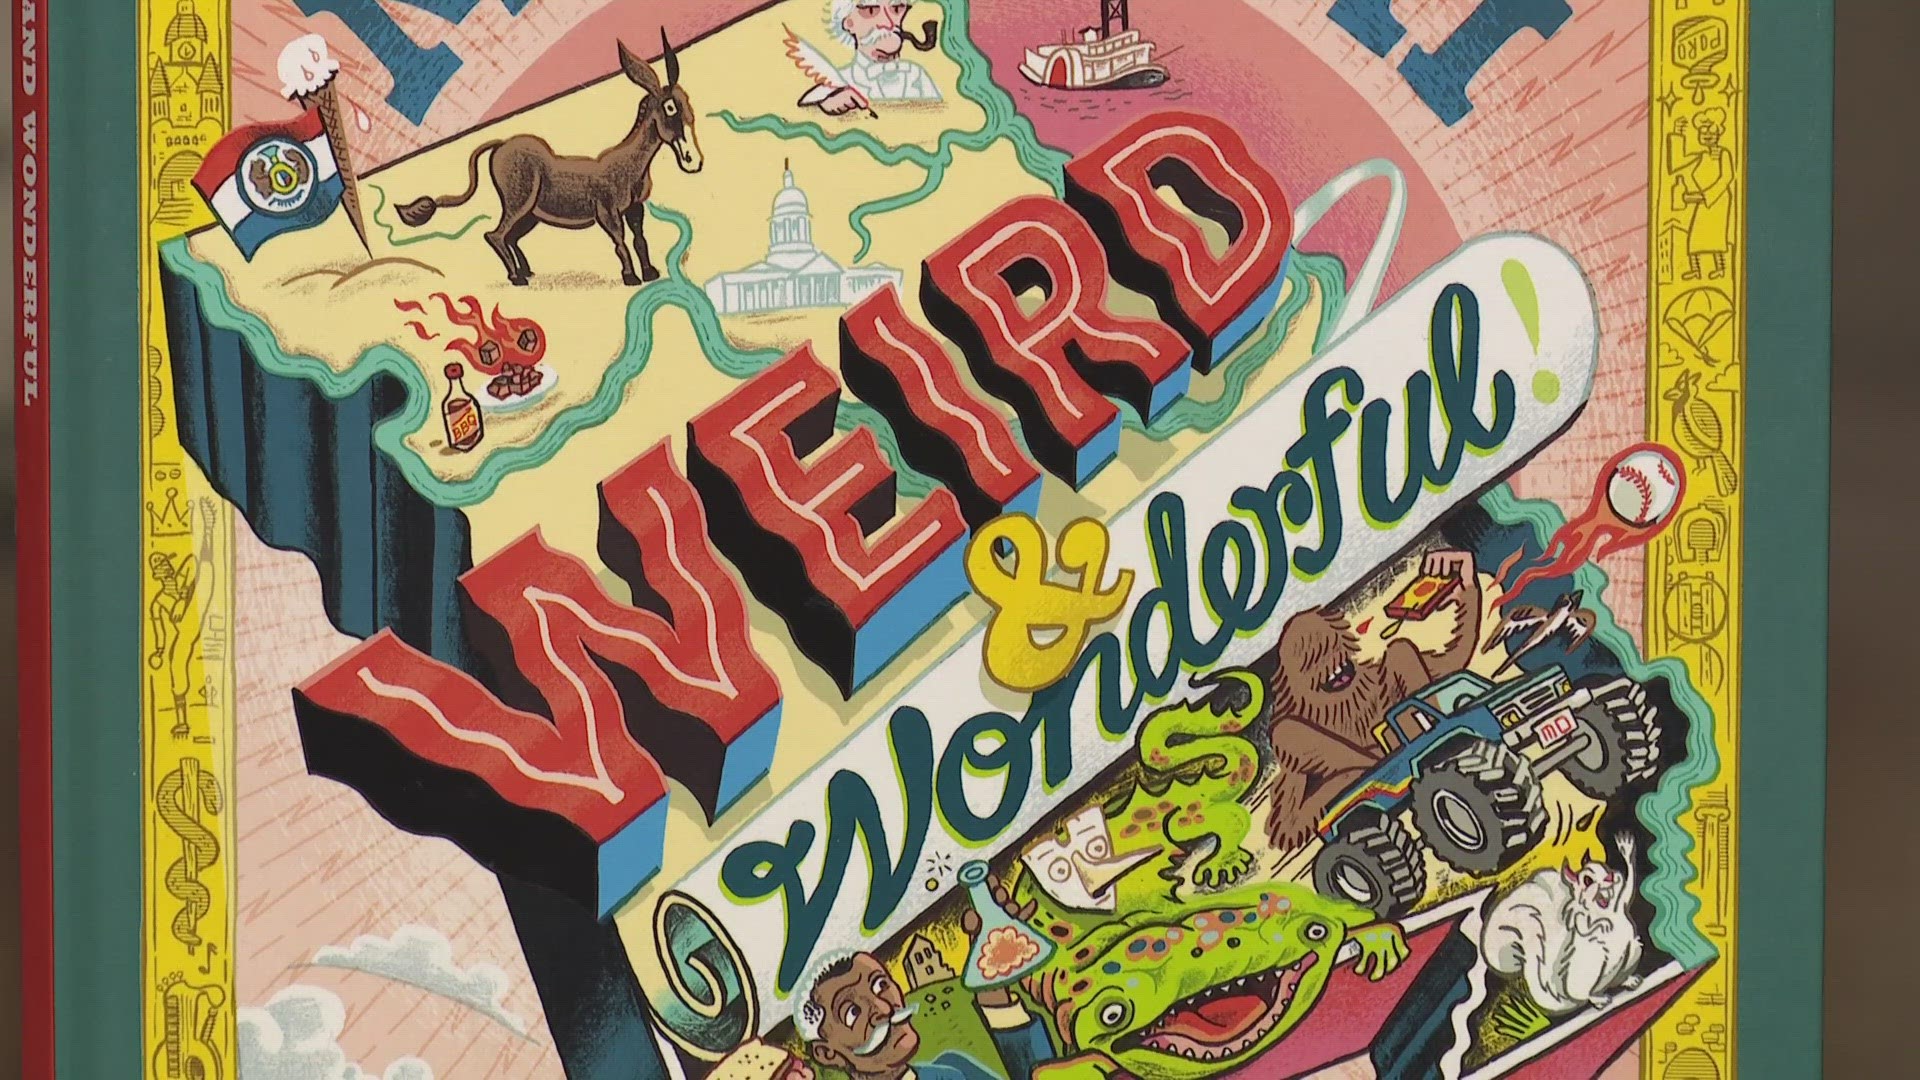 Illustrator Dan Zettwoch provided the amazing art in the book that shows off the "Weird & Wonderful" parts of Missouri. Amanda Doyle coauthored the book.